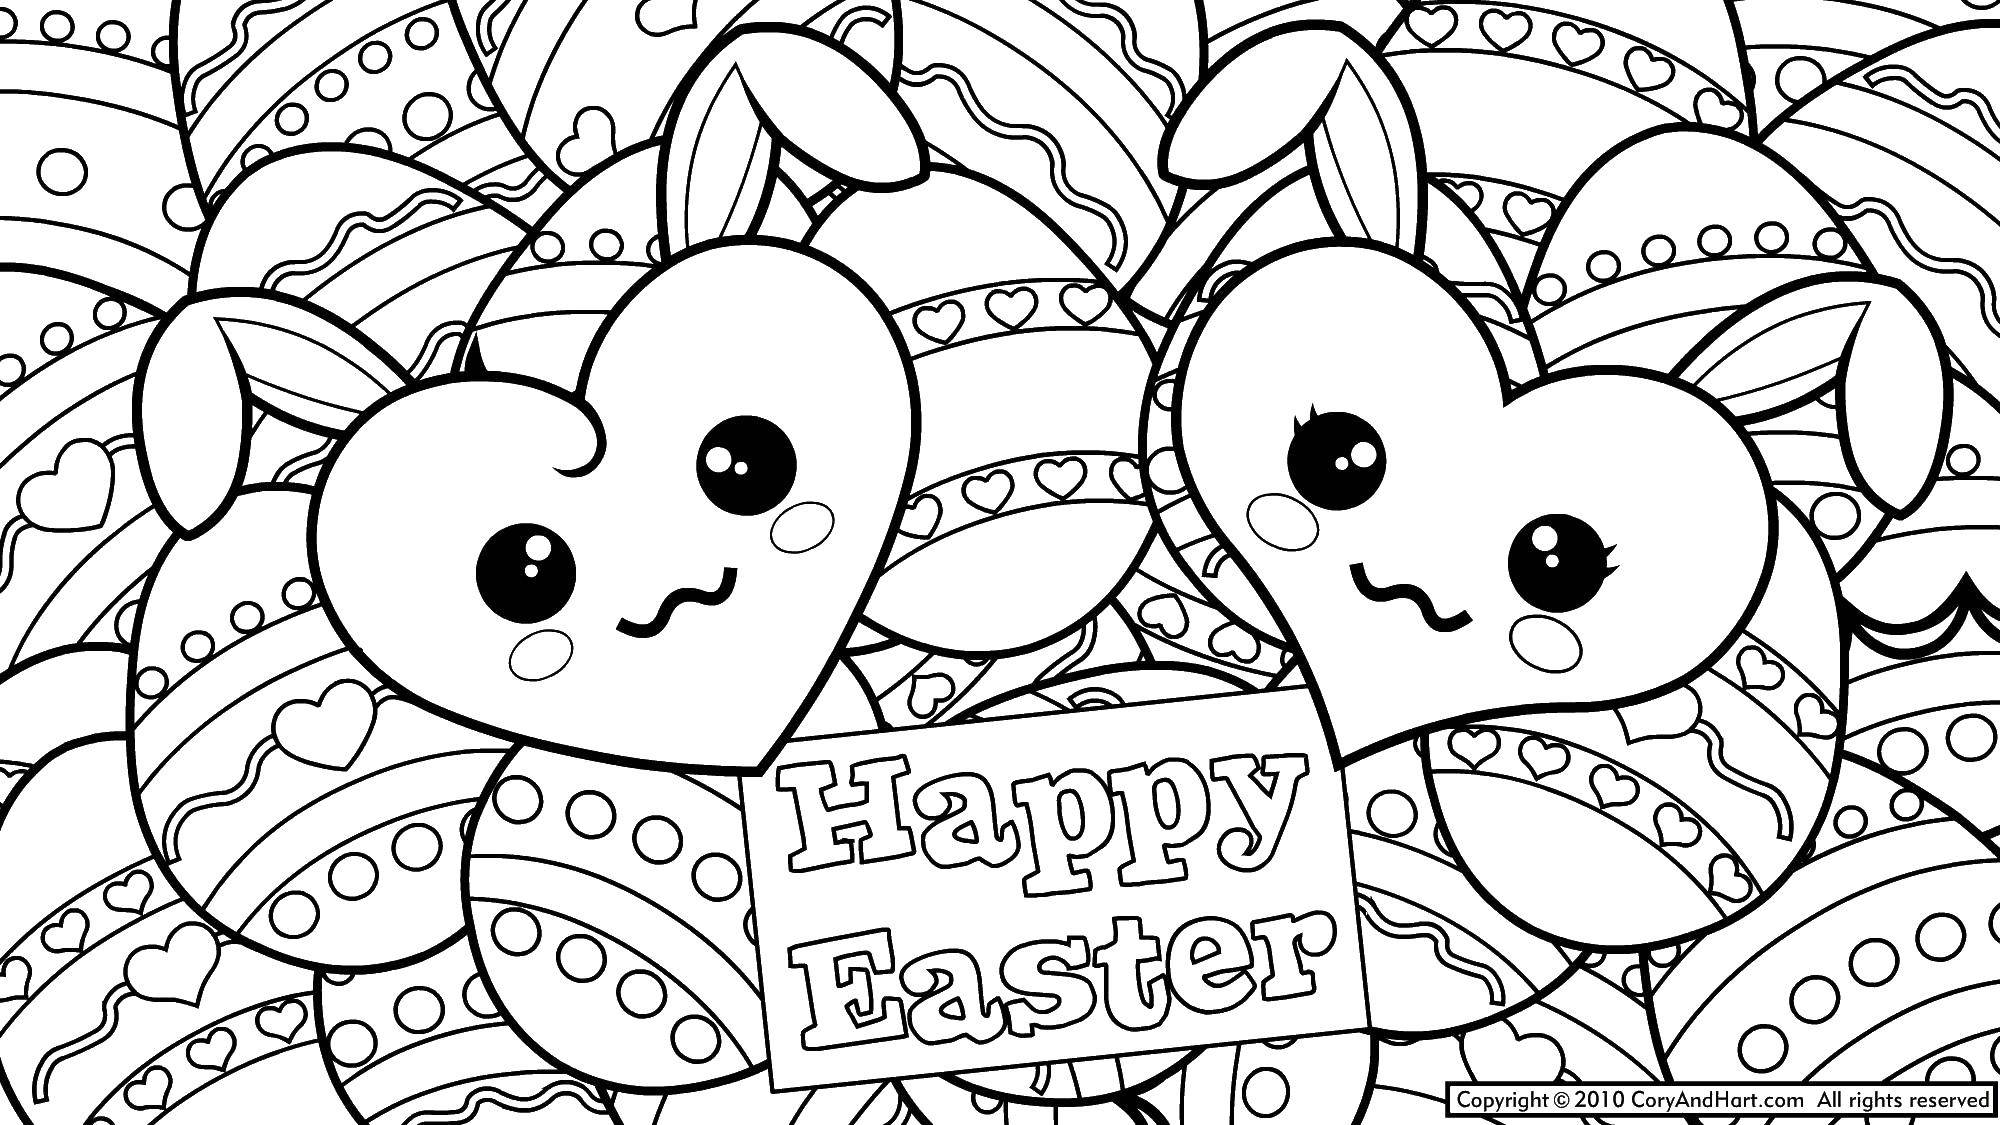 Coloring Heart bunnies. Category the rabbit. Tags:  rabbits.